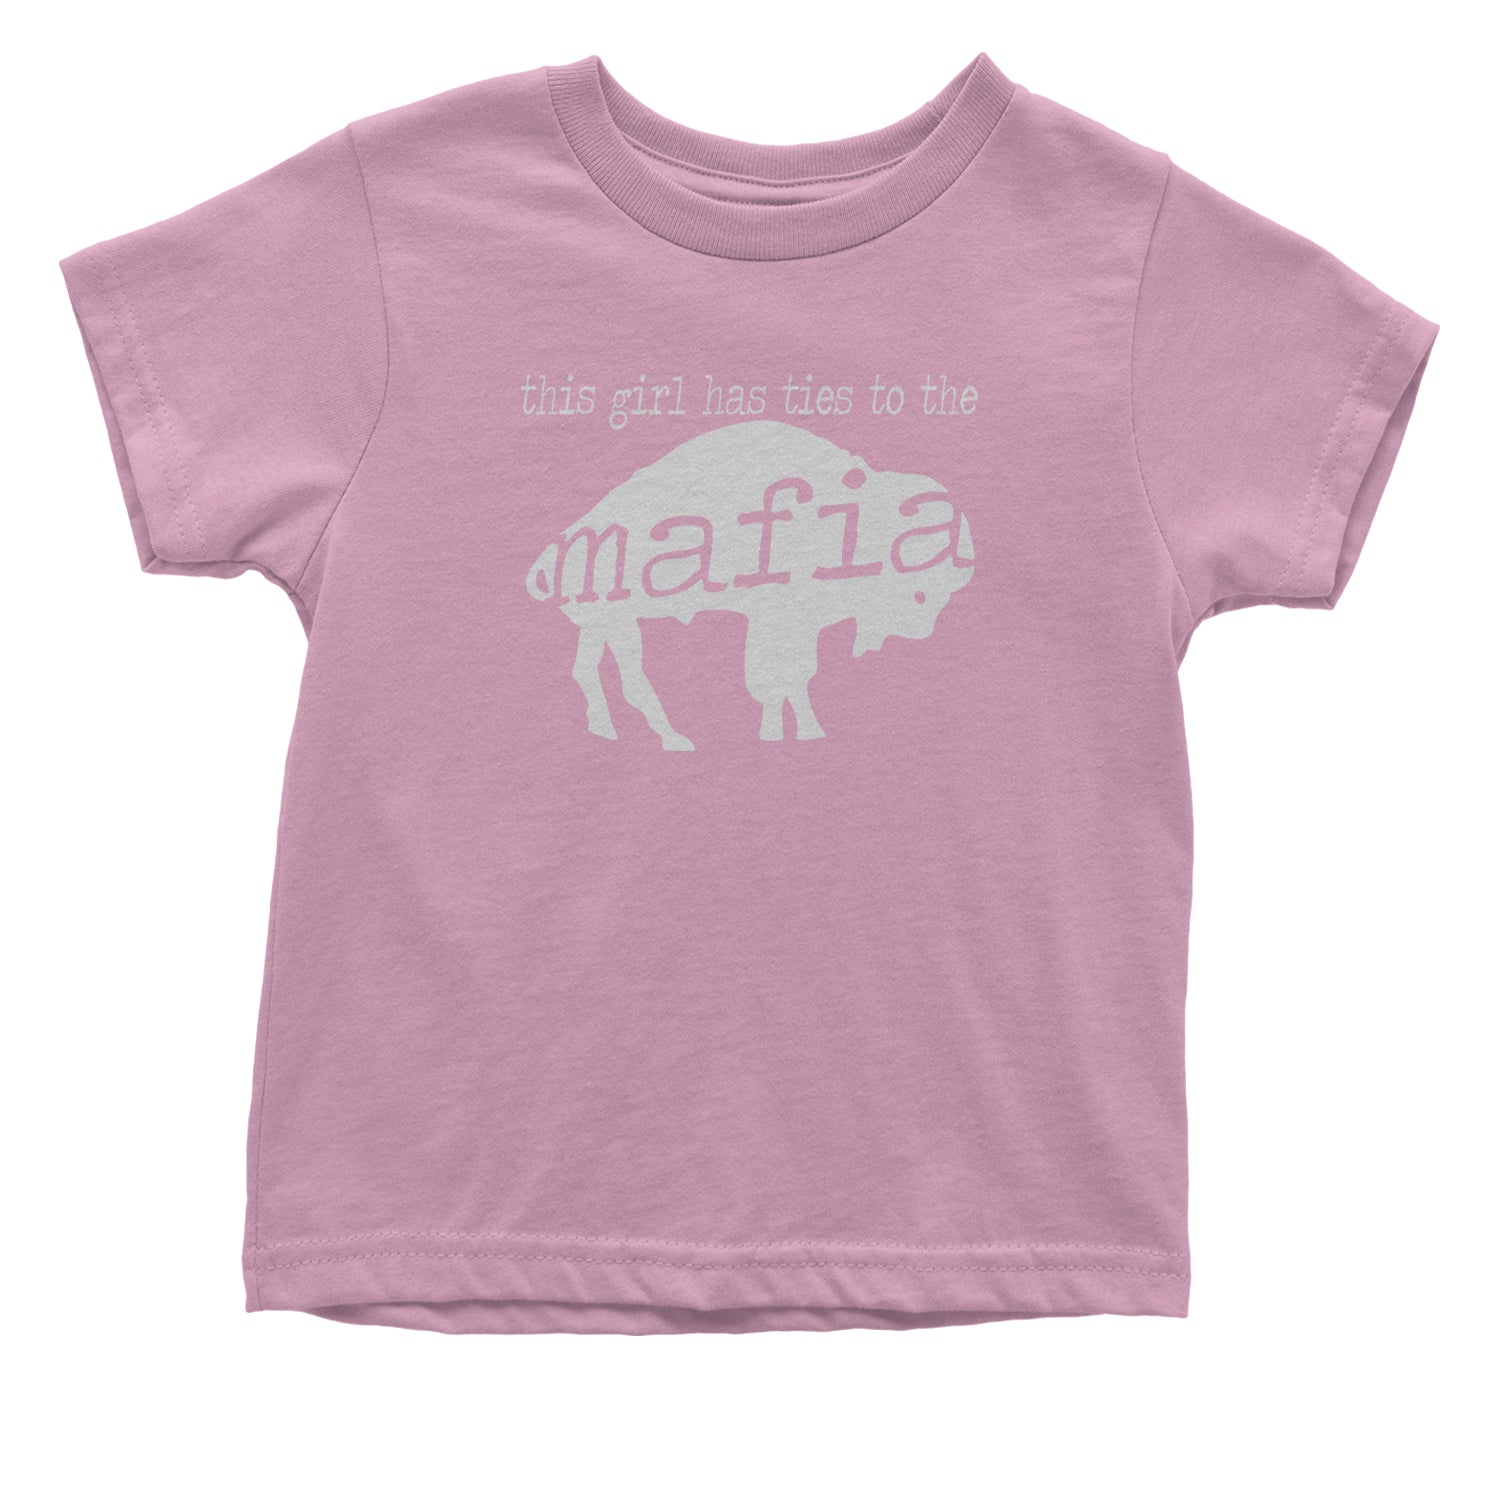 This Girl Has Ties To The Bills Mafia Infant One-Piece Romper Bodysuit and Toddler T-shirt bills, fan, football, new, sports, team, york by Expression Tees